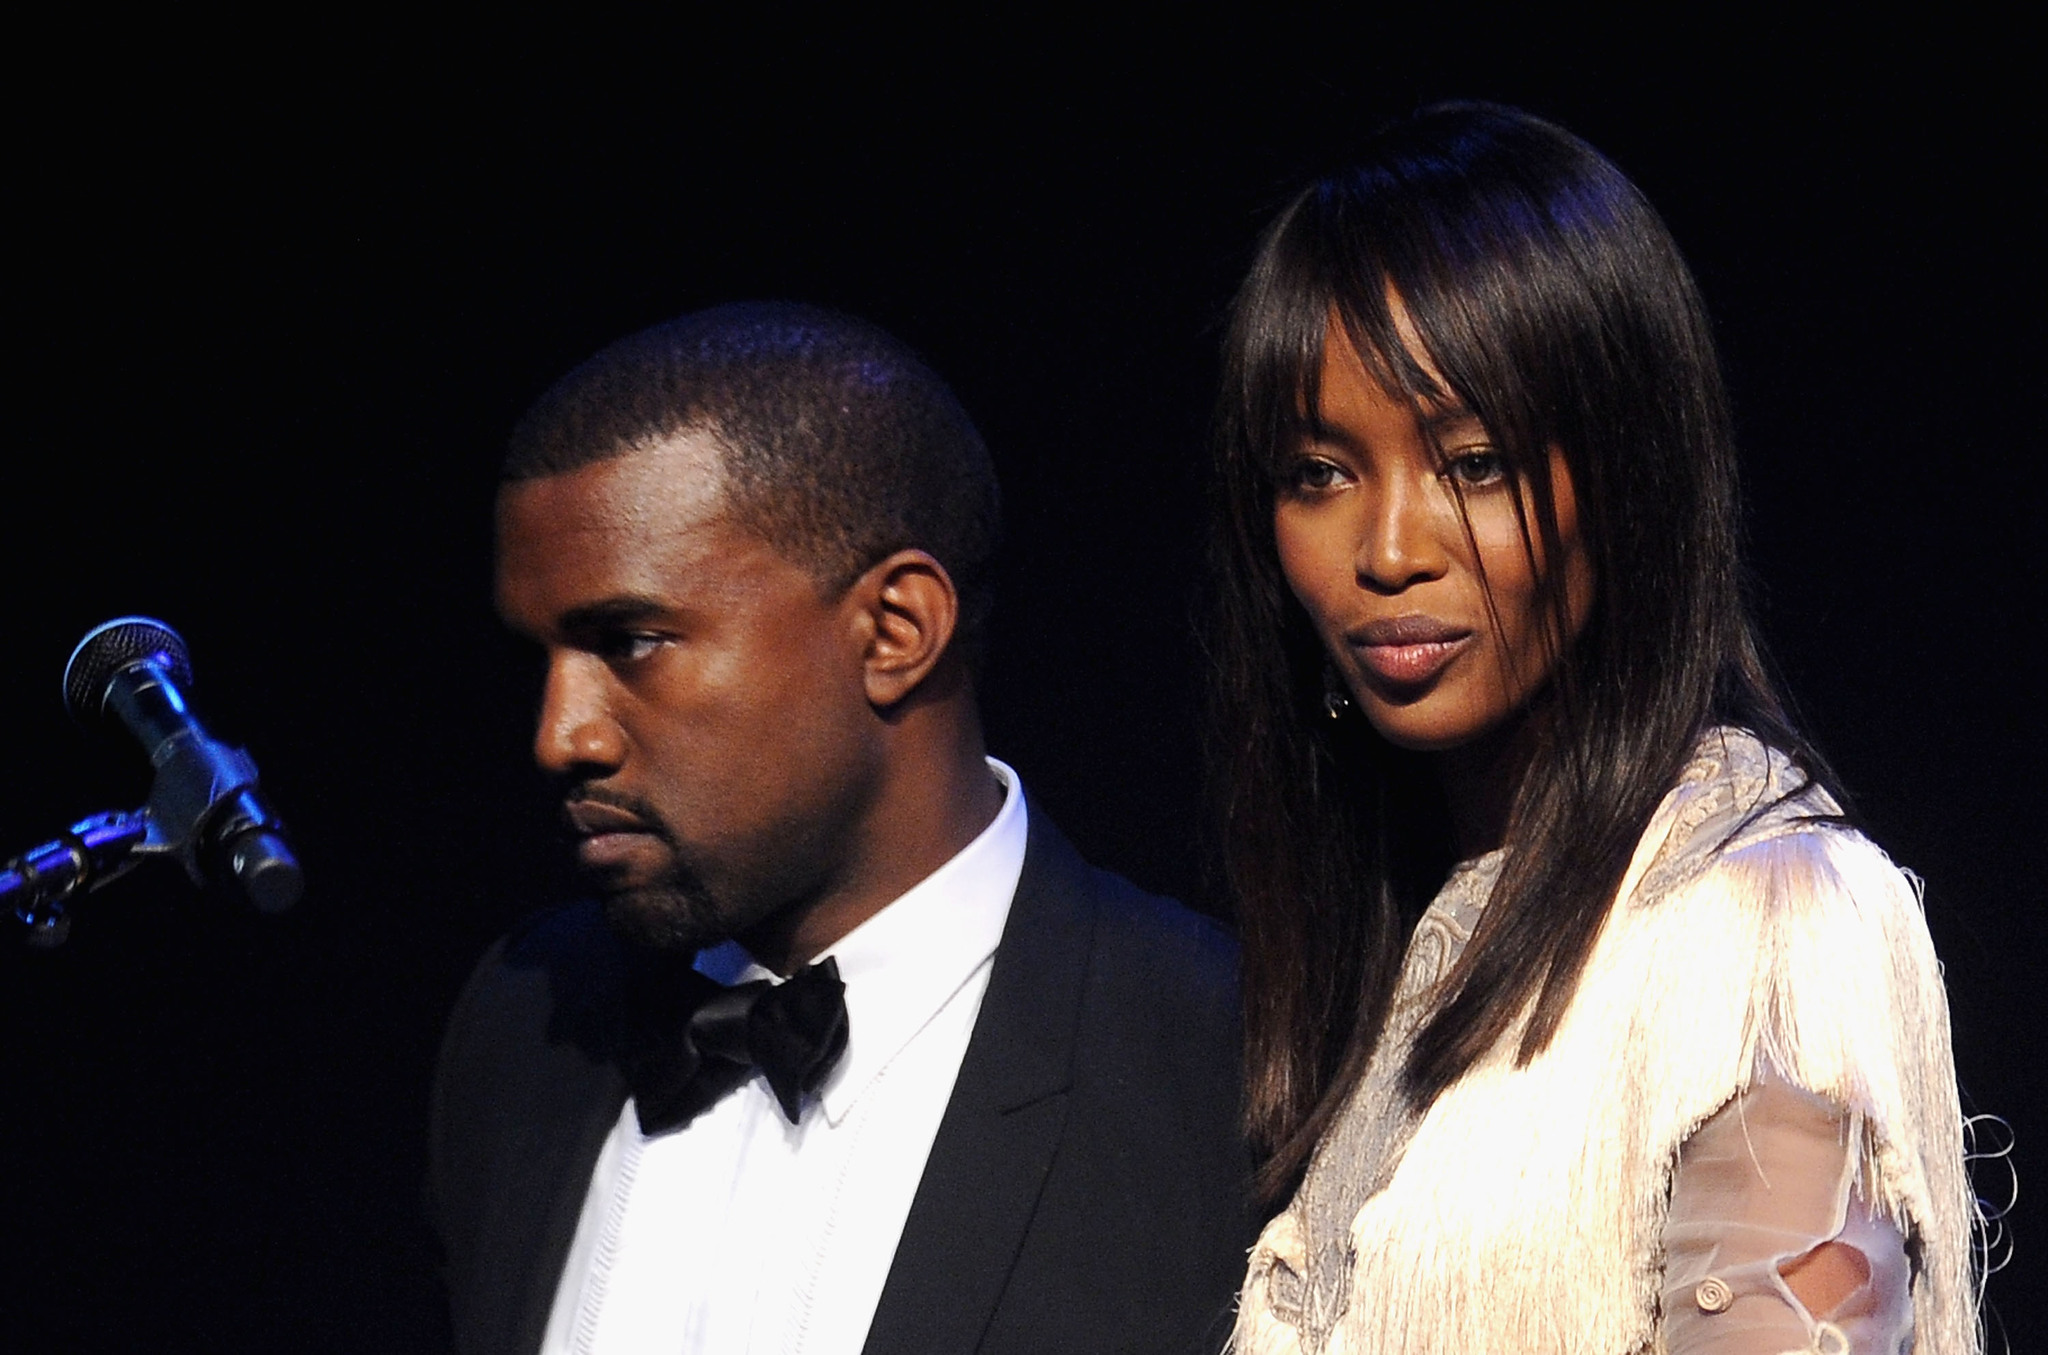 Naomi Campbell and Kanye West